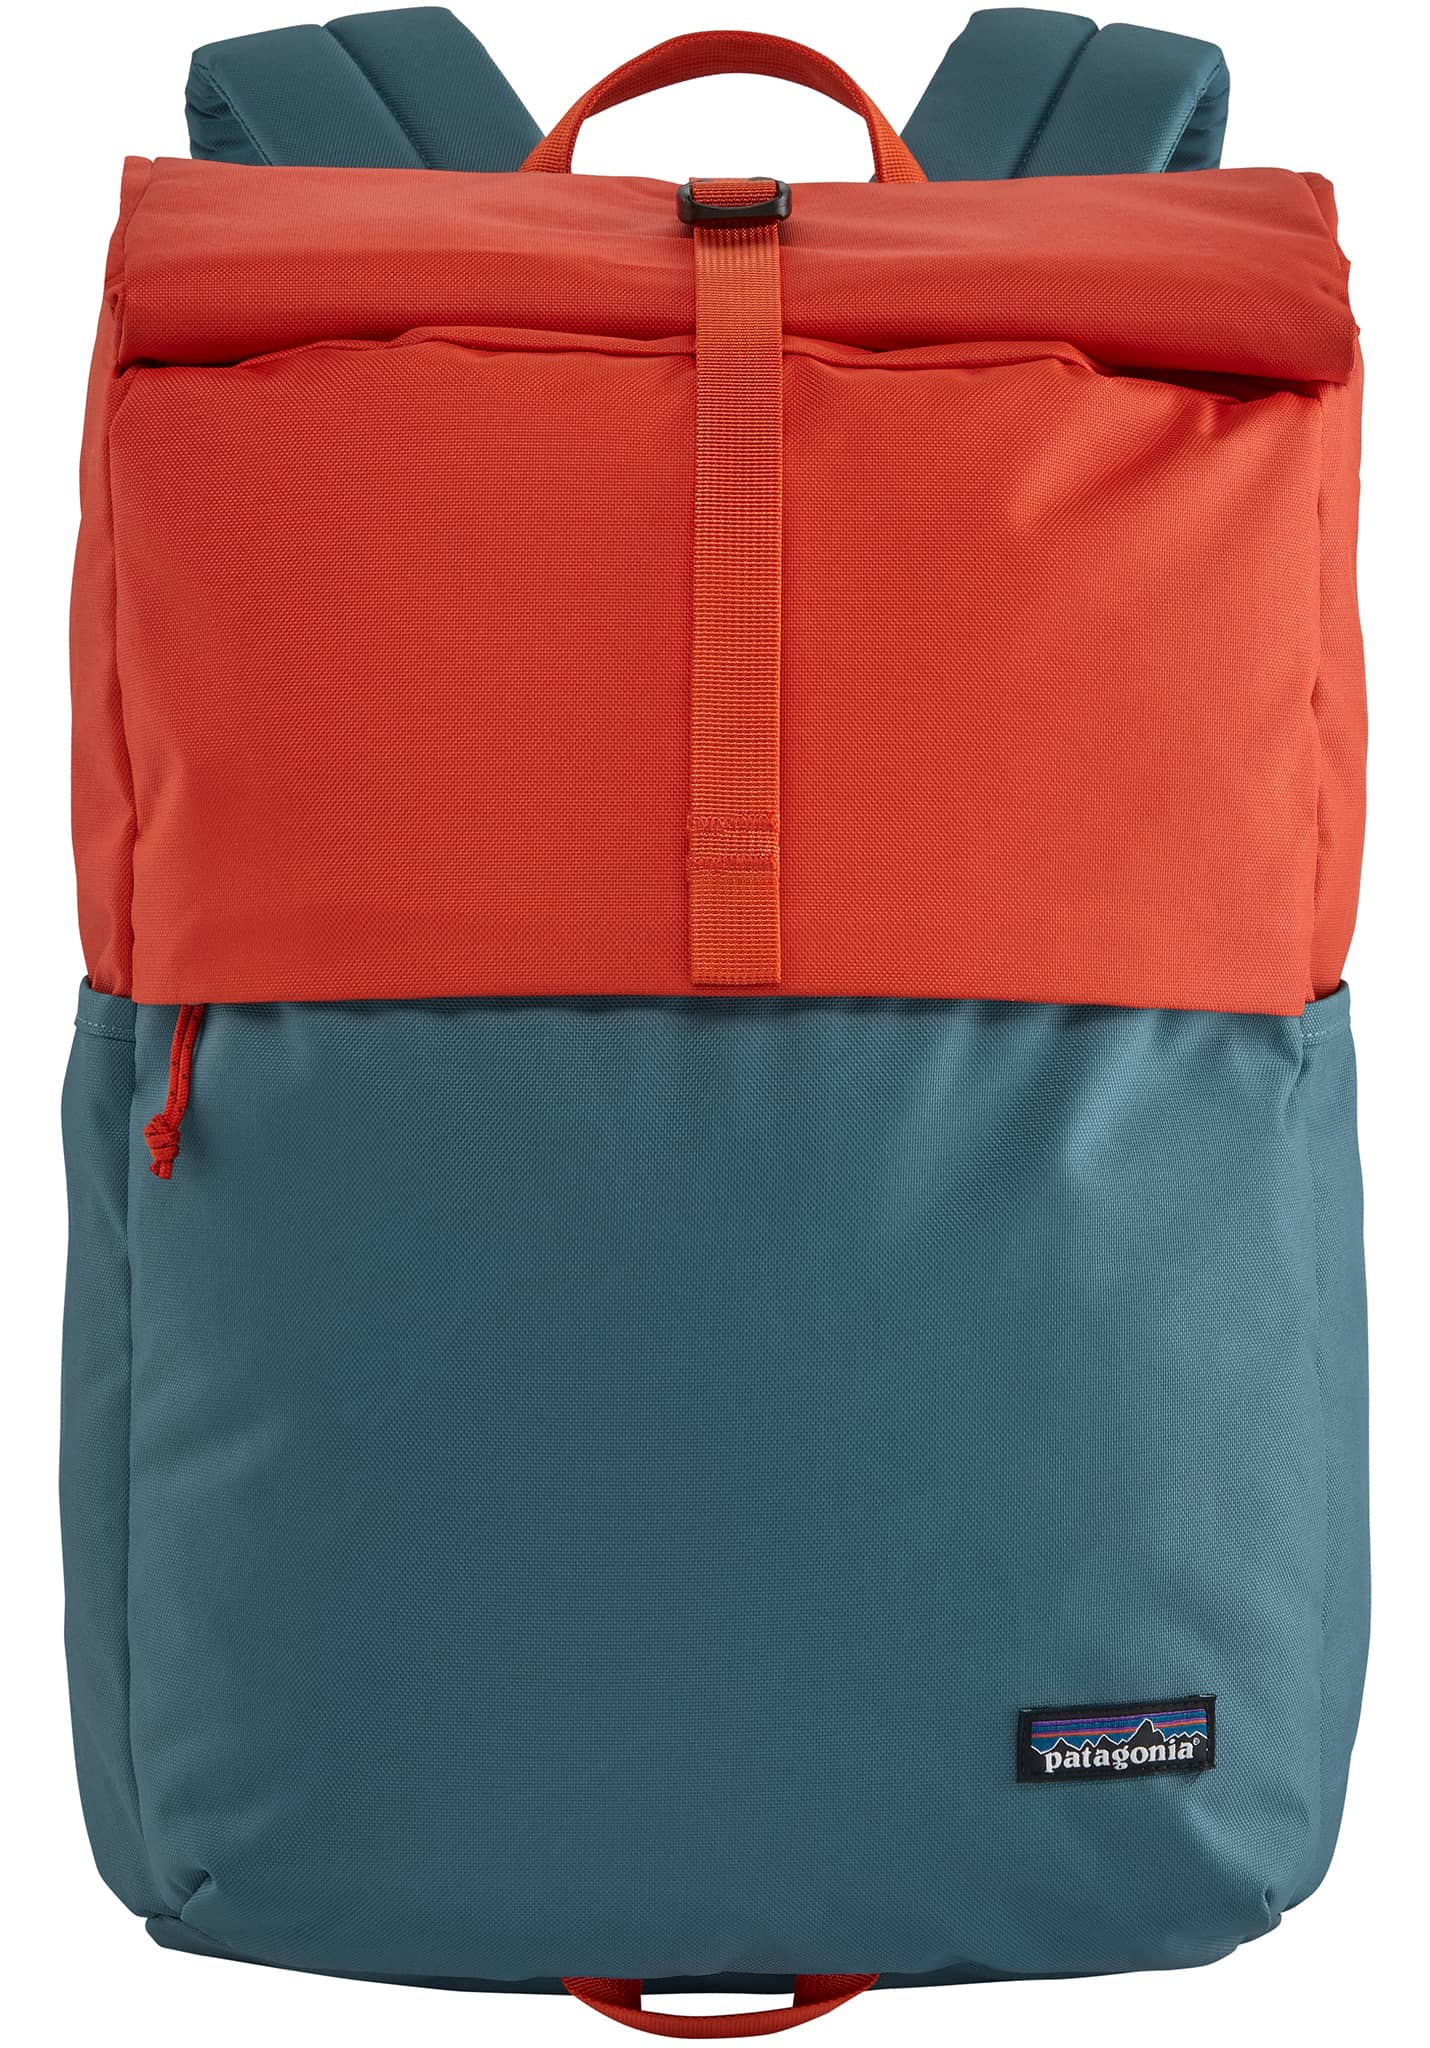 Patagonia Arbor Roll Top 30L Rucksack paintbrush red One Size